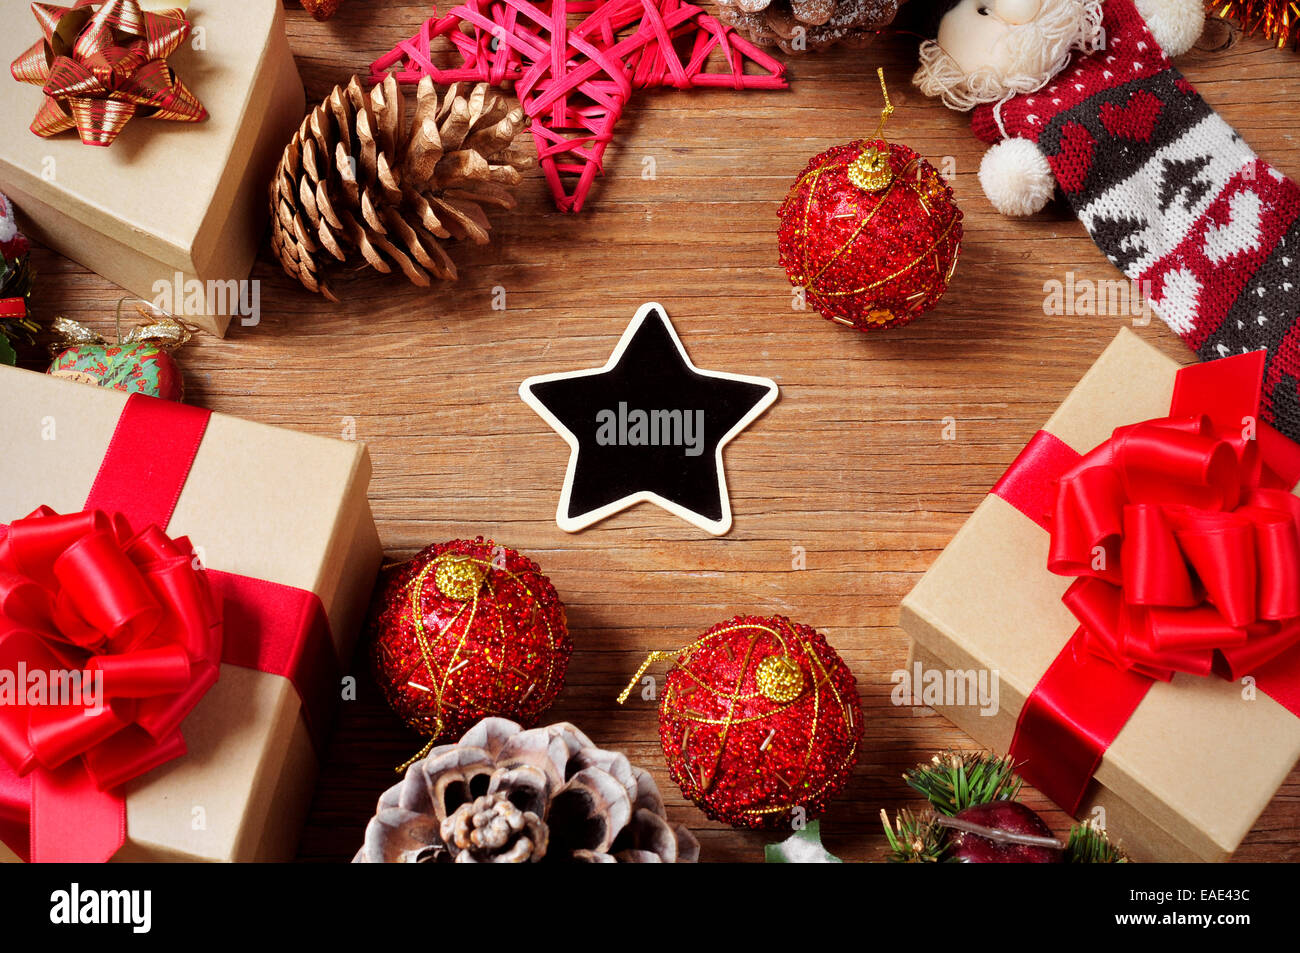 a pile of gifts and christmas ornaments, such as christmas balls and stars, on a rustic wooden table with a blank heart-shaped c Stock Photo